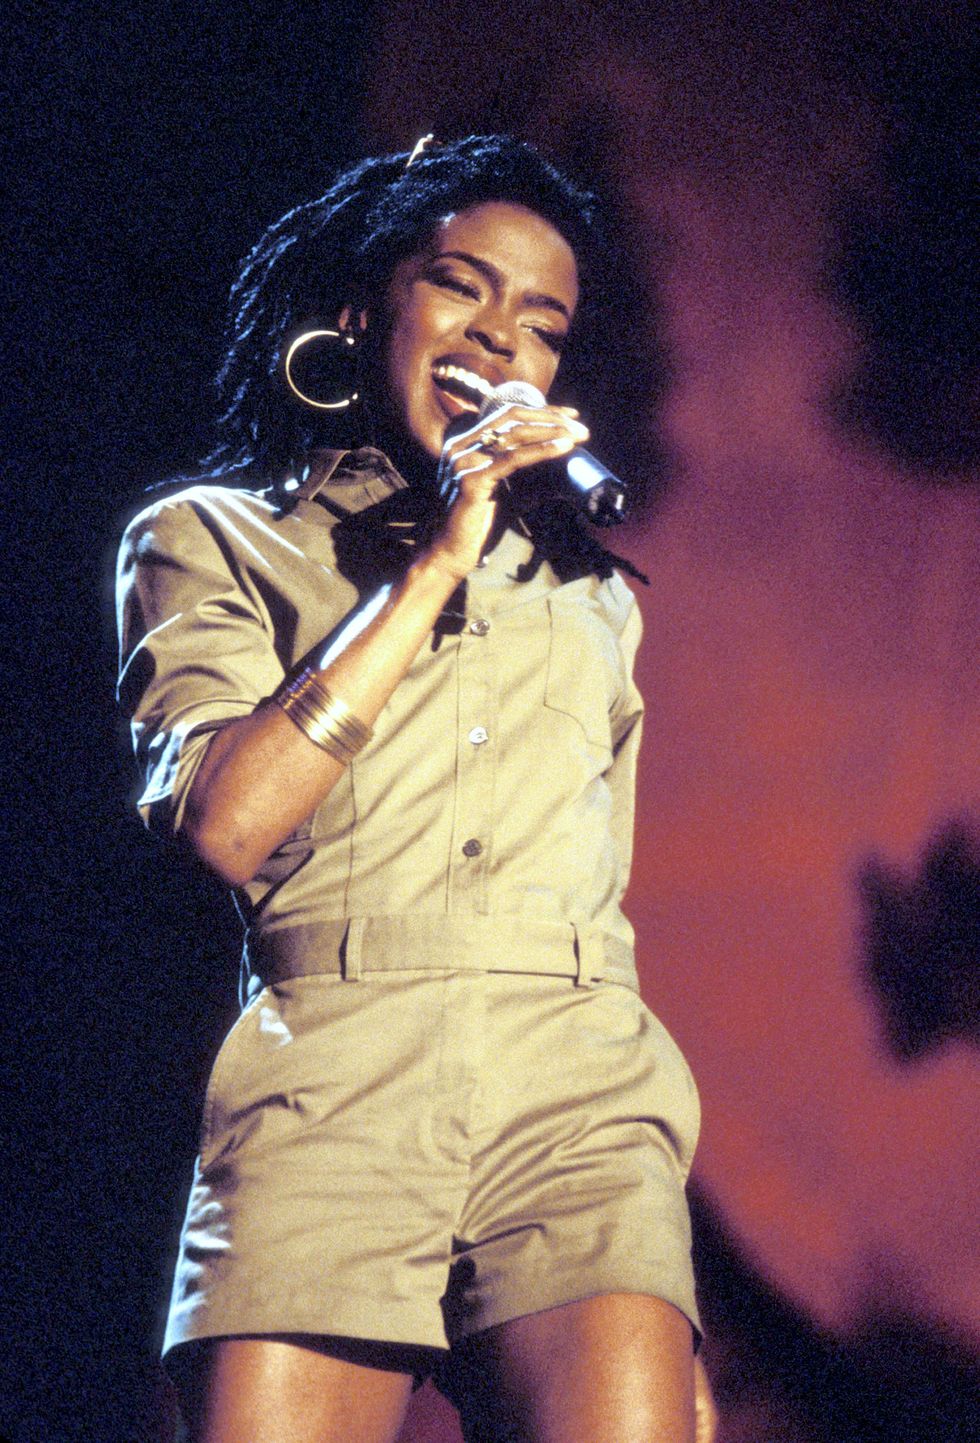 Famous Recluses: Phenomenally talented, occasionally controversial, and hardly seen in public, the former Fugees singer/songwriter Lauryn Hill is a genuine creative force. Her influence (Alicia Keys, John Legend, and others readily sing her praises) or the fascination she still generates in literally millions of music fans can't be denied. (Photo: WireImage)